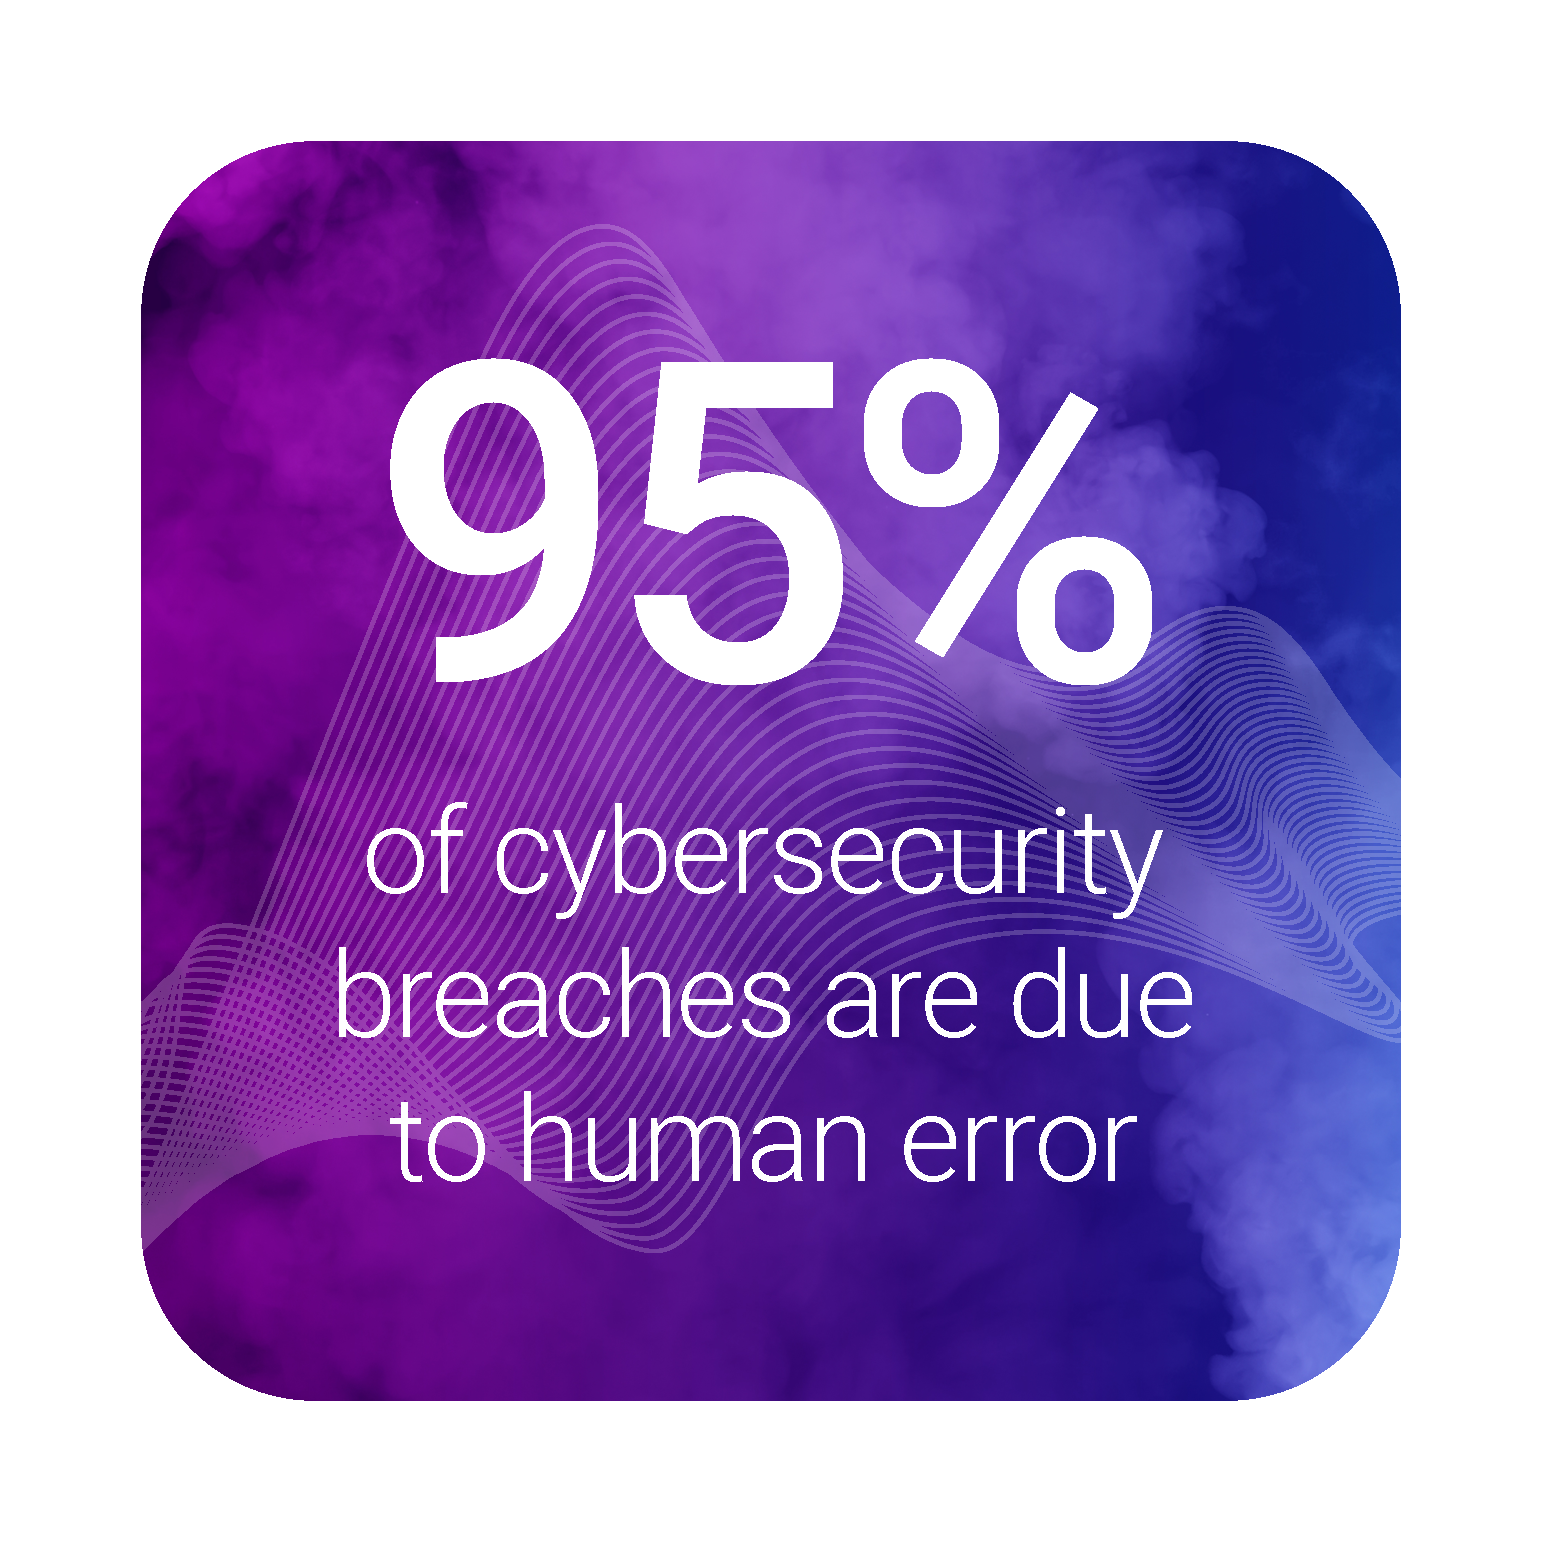 95% of cybersecurity breaches are due to human error